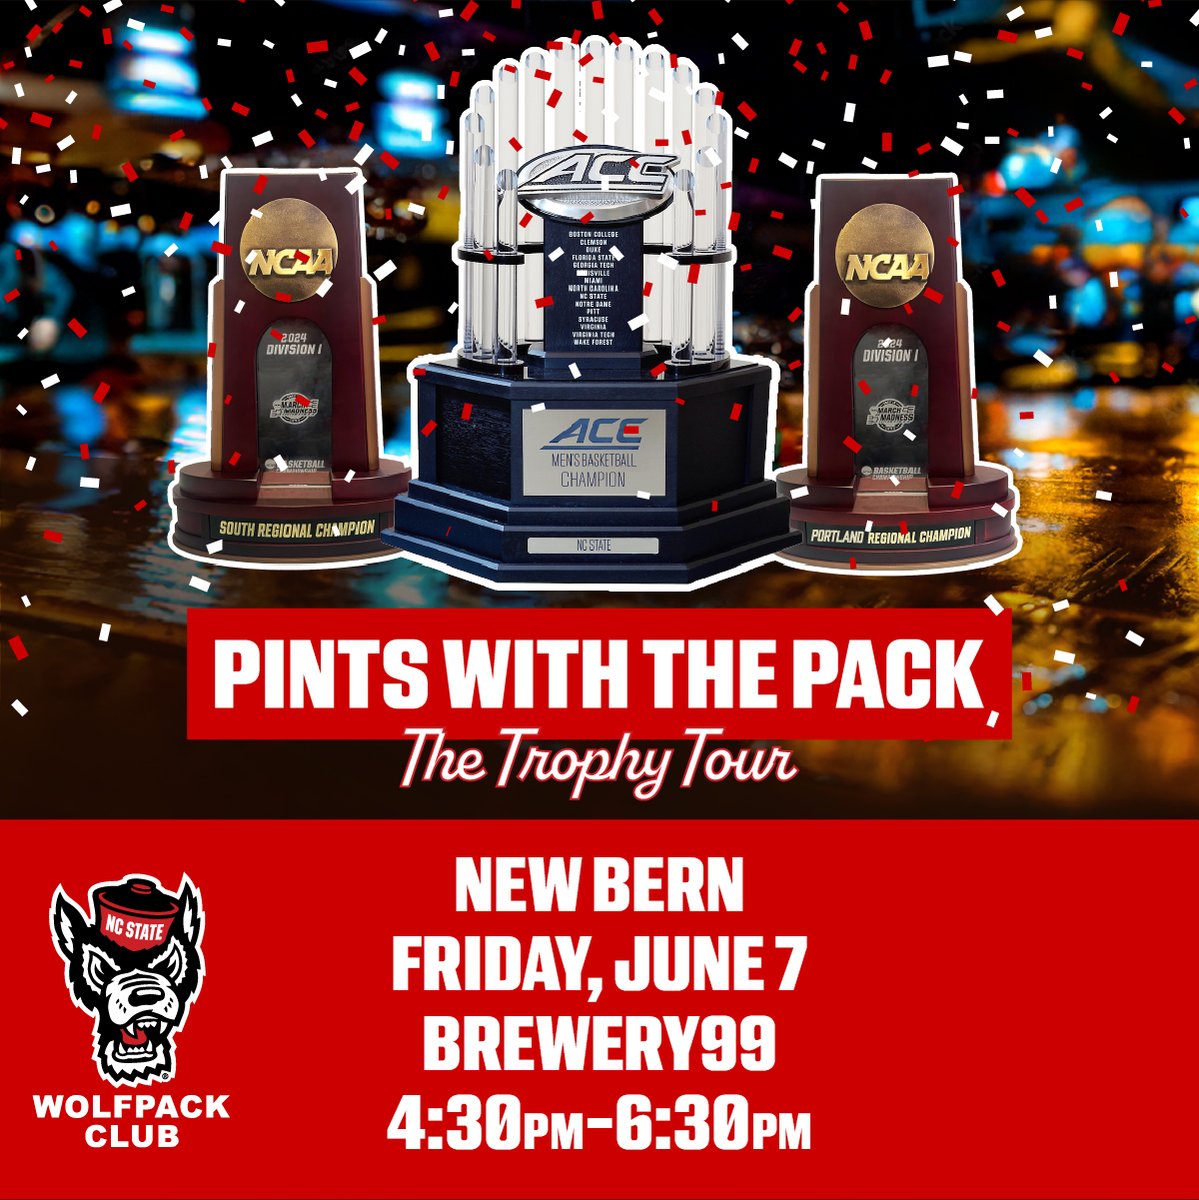 We're visiting Atlantic Beach and New Bern for Pints With The Pack next week! 

🏆 - photo op with basketball trophies
🍺 - pint glass for first 50 attendees 
🎉 - celebrate the year with #WPN 

Full Schedule & RSVP: bit.ly/4bbj7jc